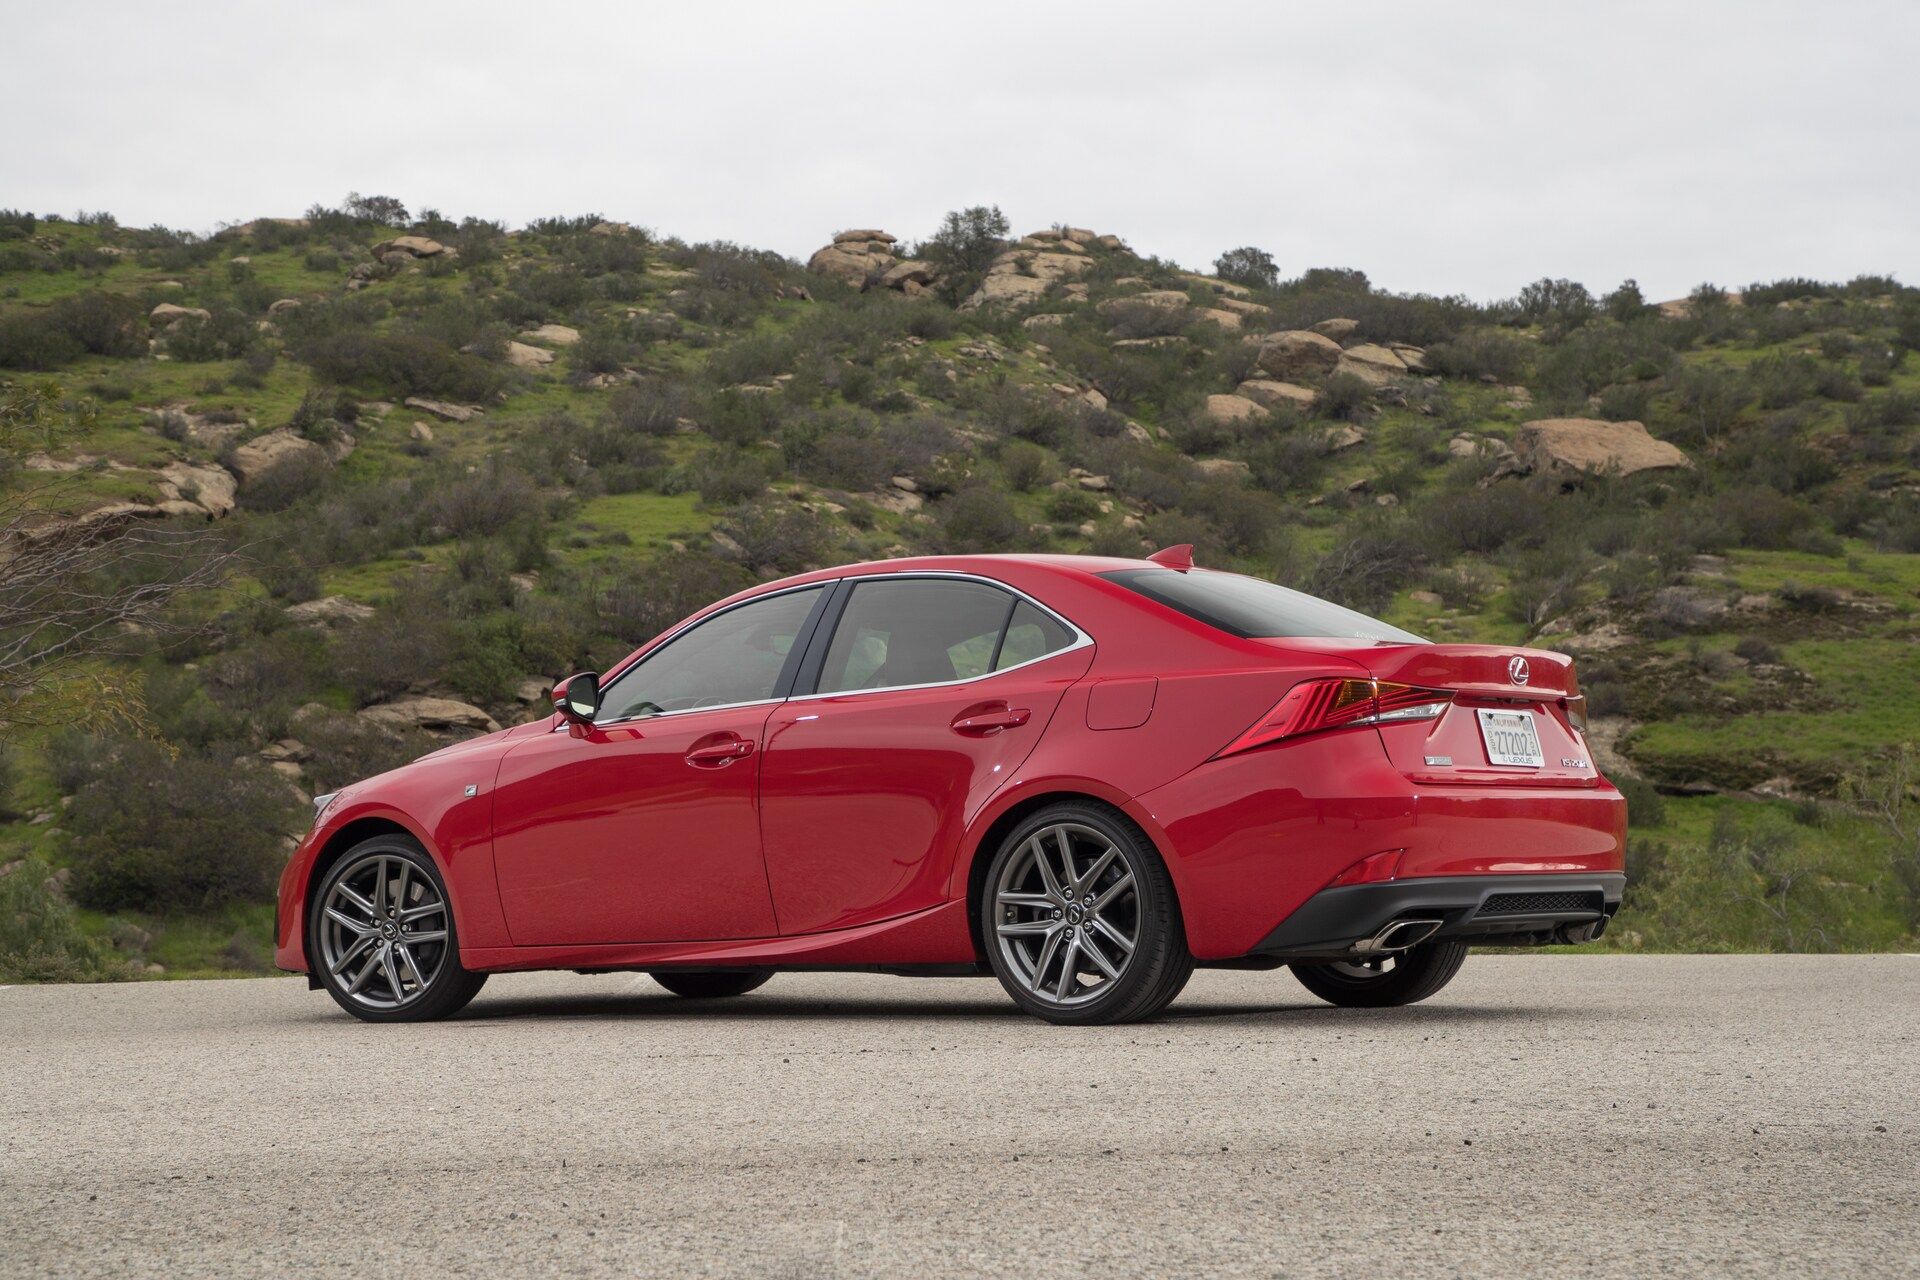 2017 Lexus Is 200t Rear Three Quarter In Motion  (View 47 of 51)